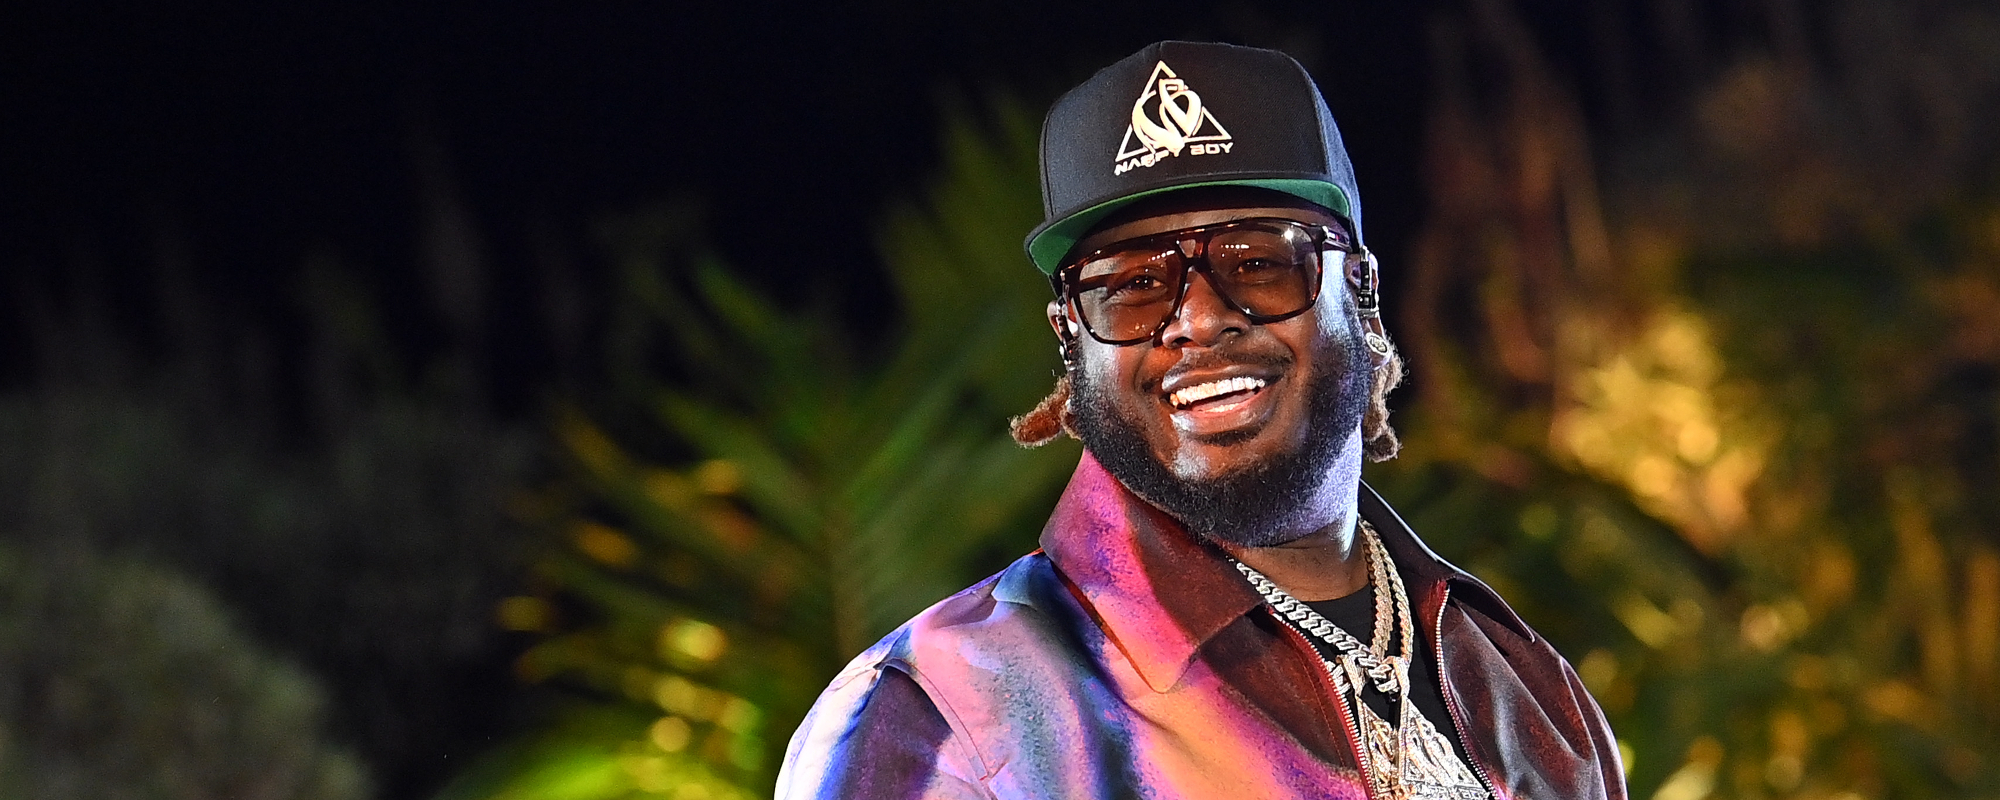 T-Pain Gains High Praise From Gavin DeGraw After Nailing Cover of His 2003 Hit “I Don’t Want to Be”